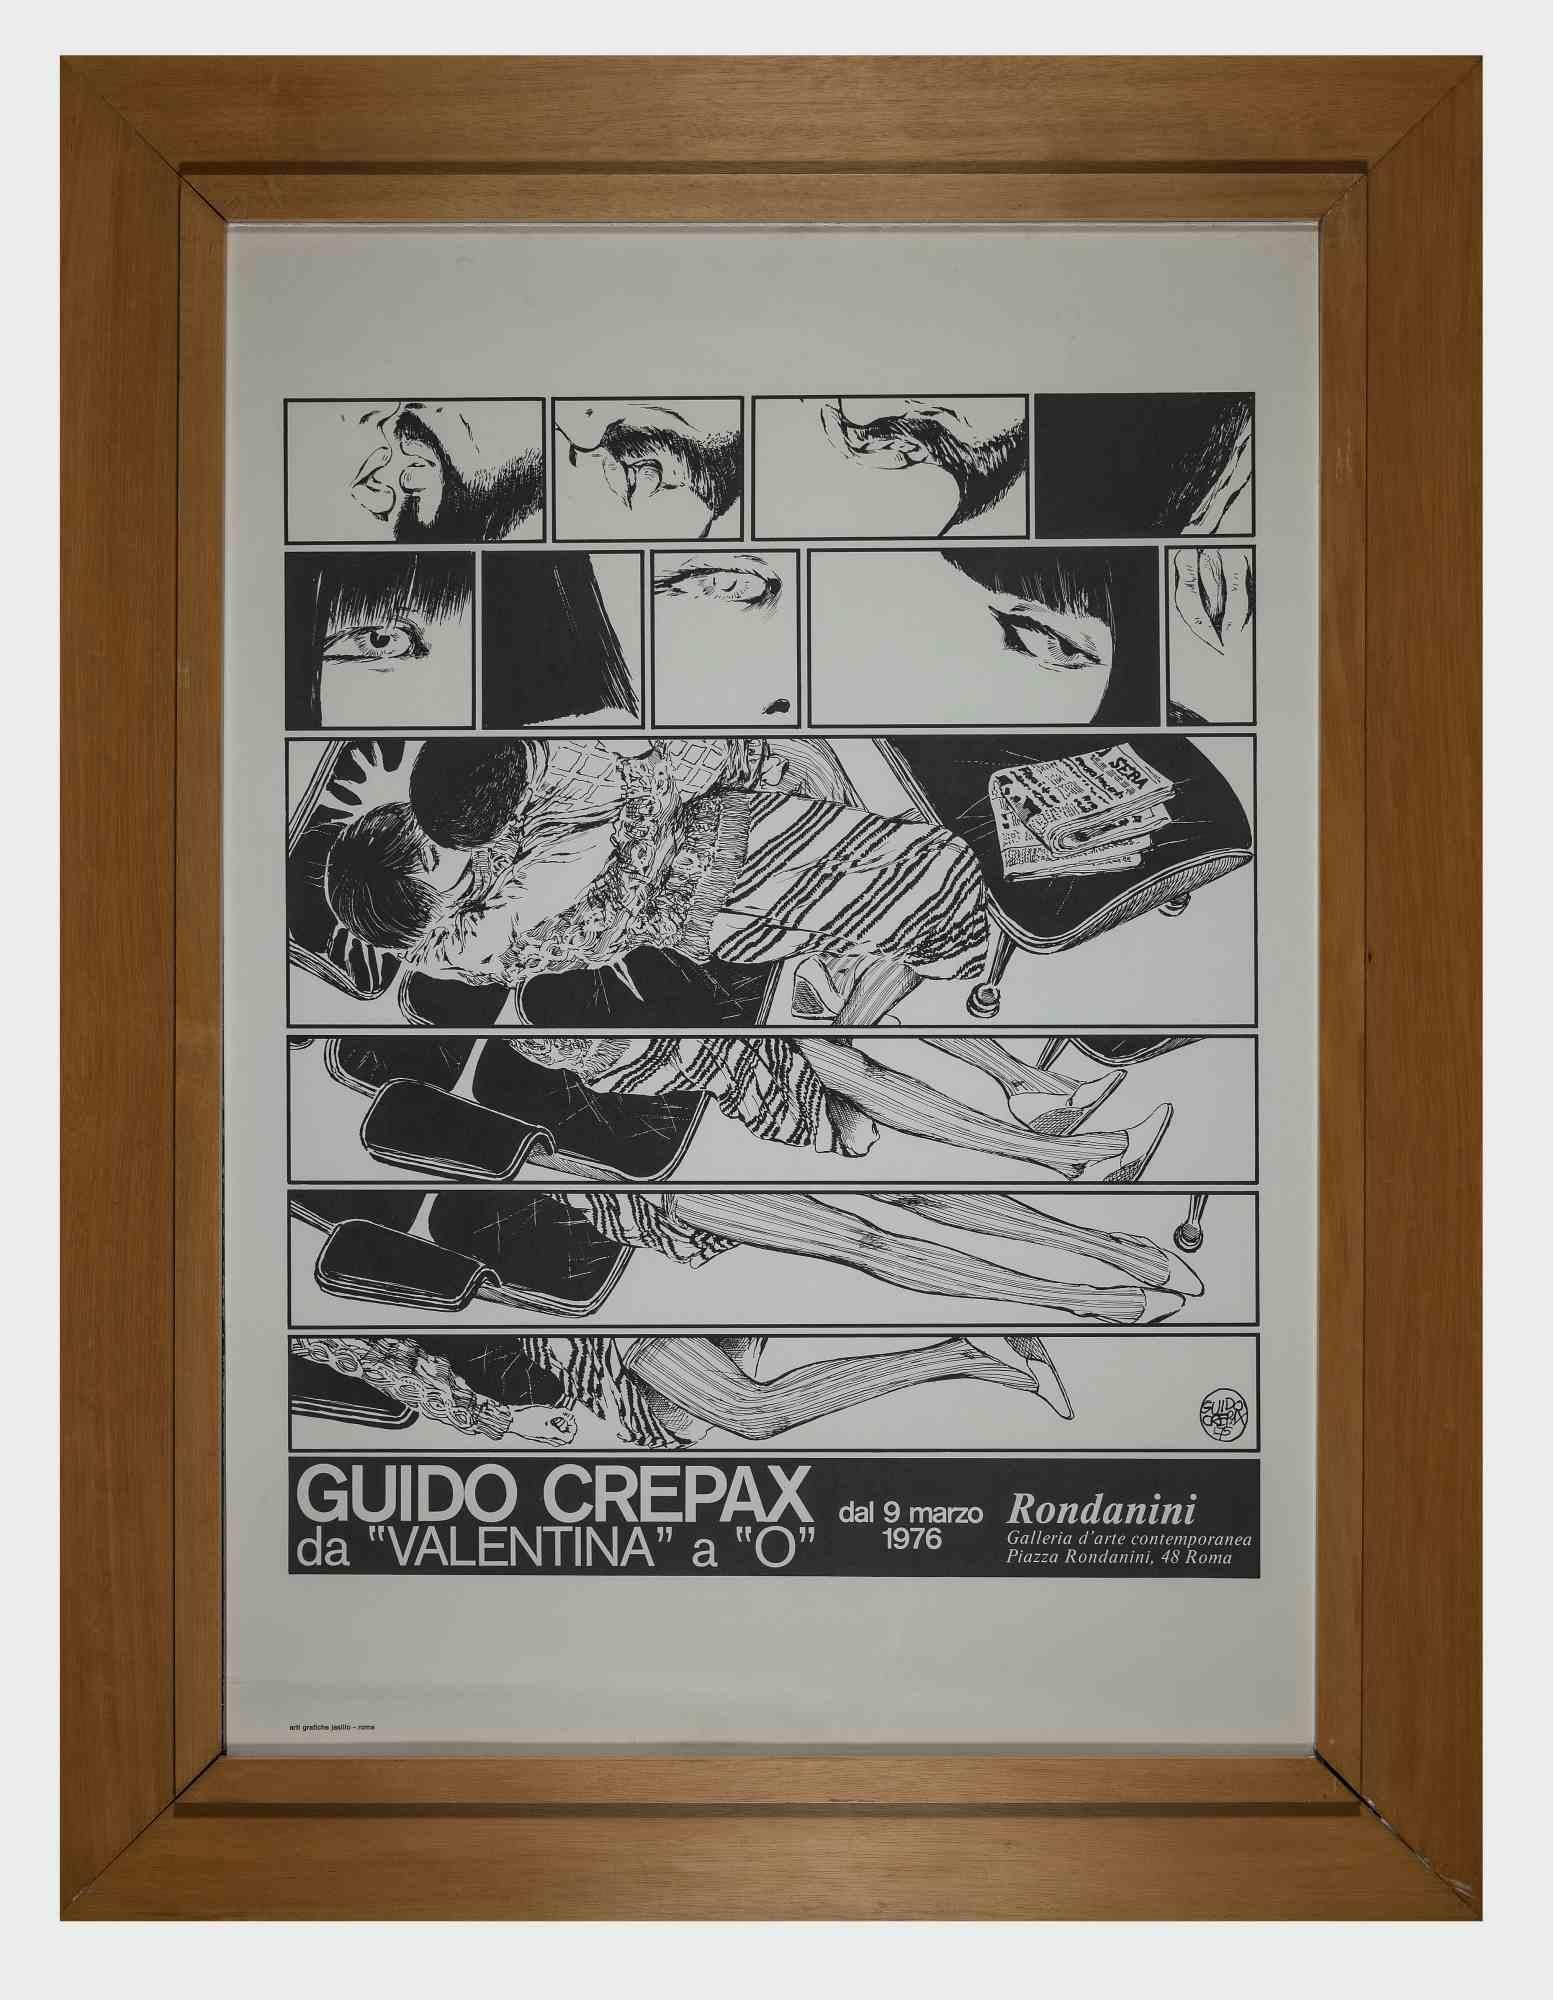 From Valentina to O "Valentina" to "O"-Vintage Offset Print by Guido Crepax-1976